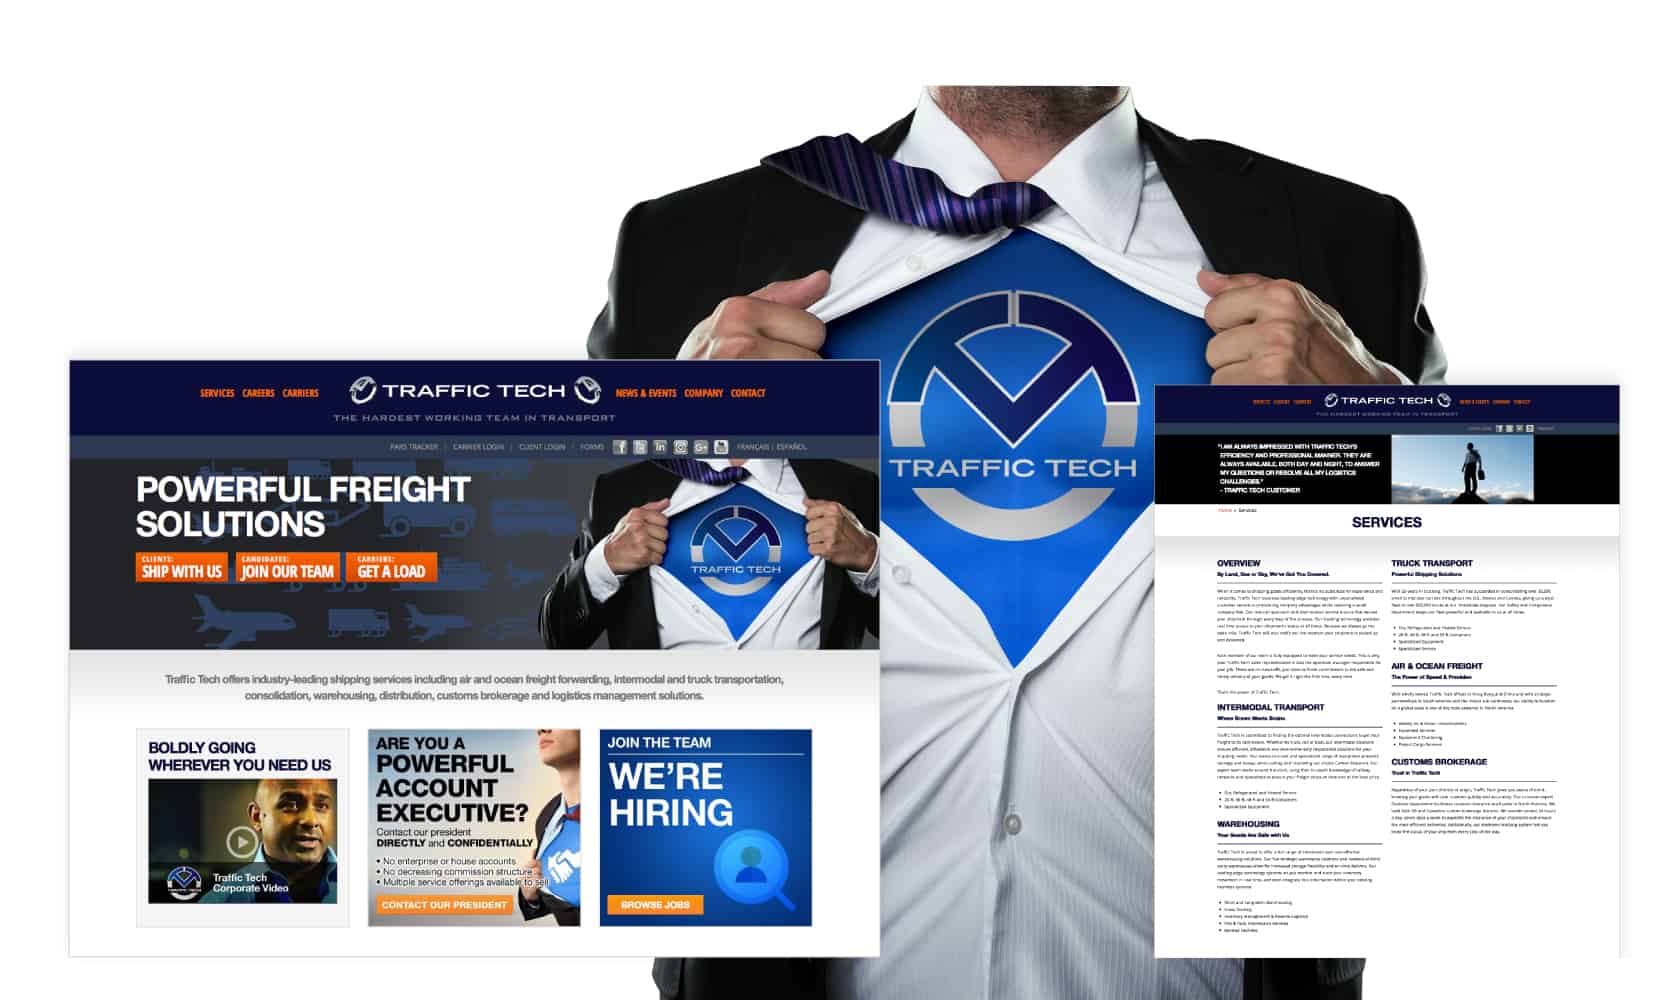 Screenshots of the Traffic Tech homepage and Services page overlaying a man opening his shirt revealing a Traffic Tech logo